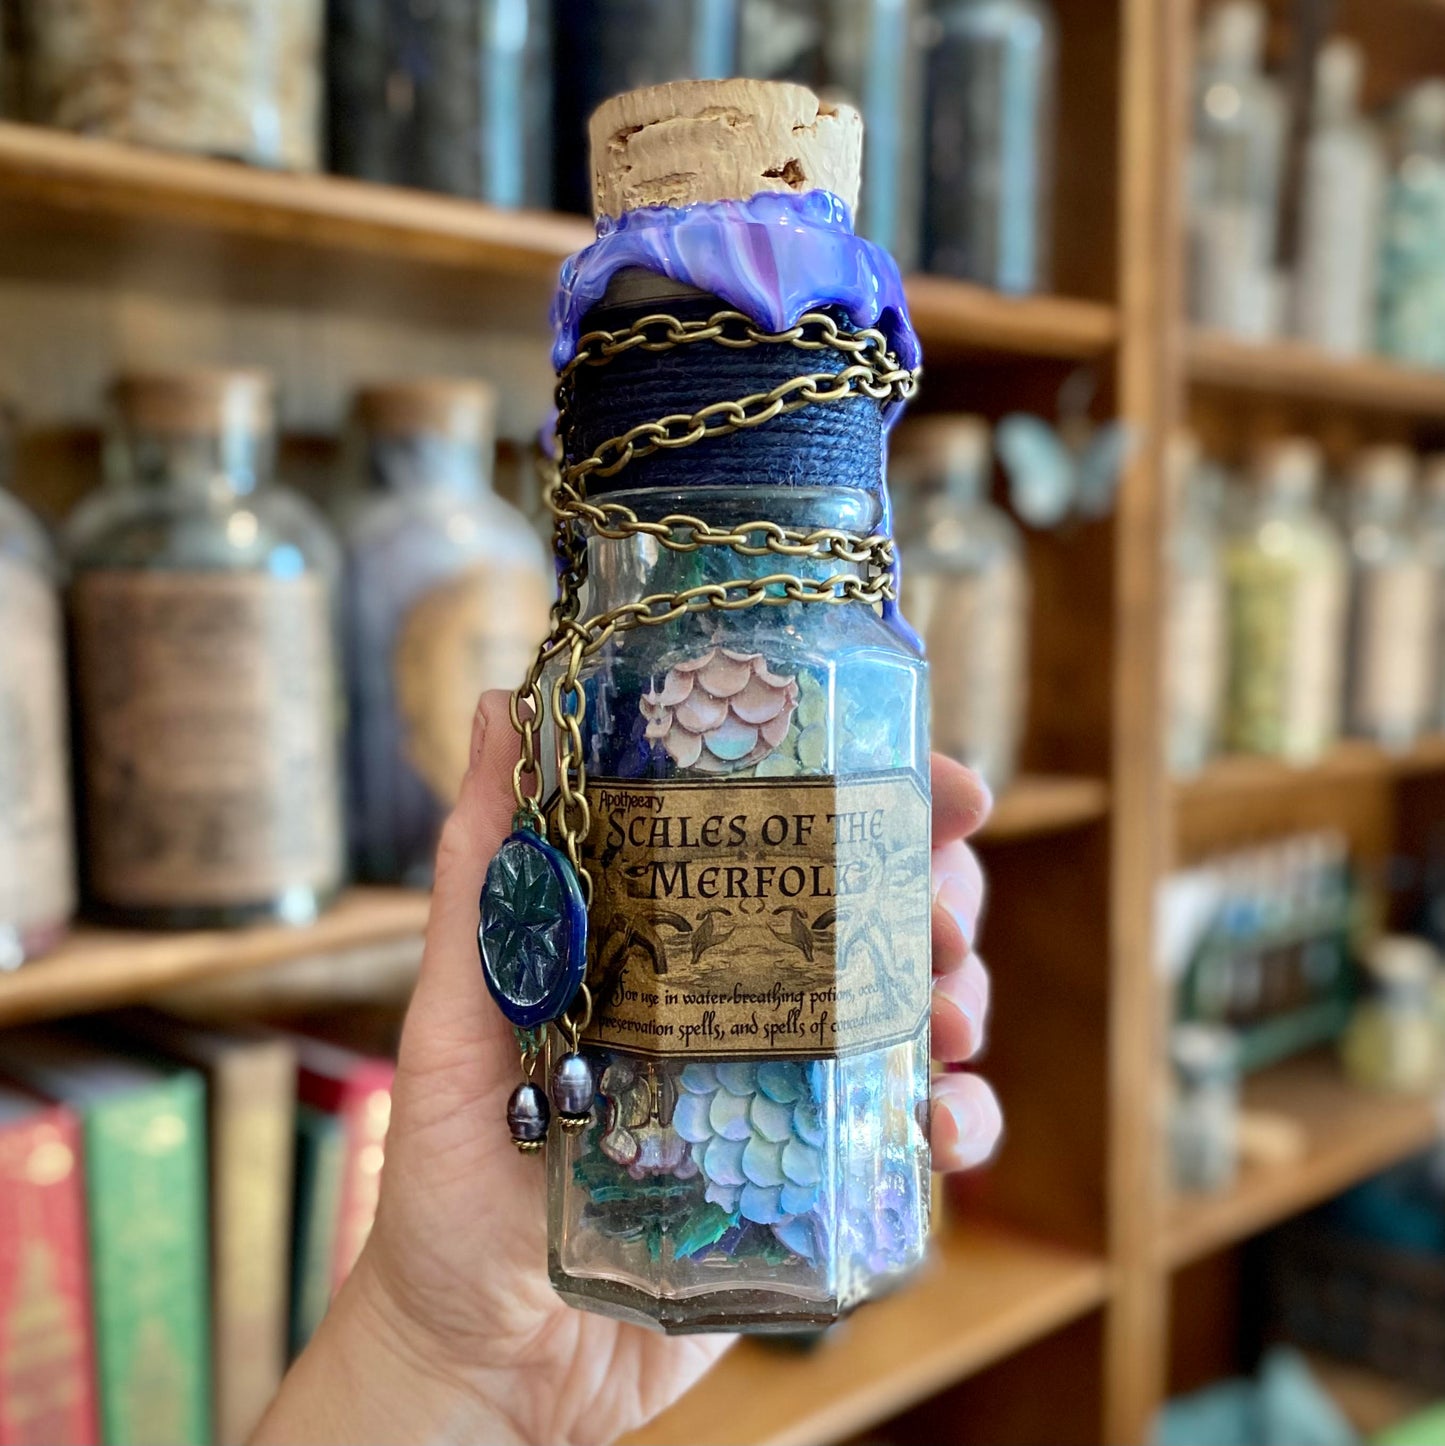 Antique Scales of The Merfolk, A Decorative Apothecary Jar